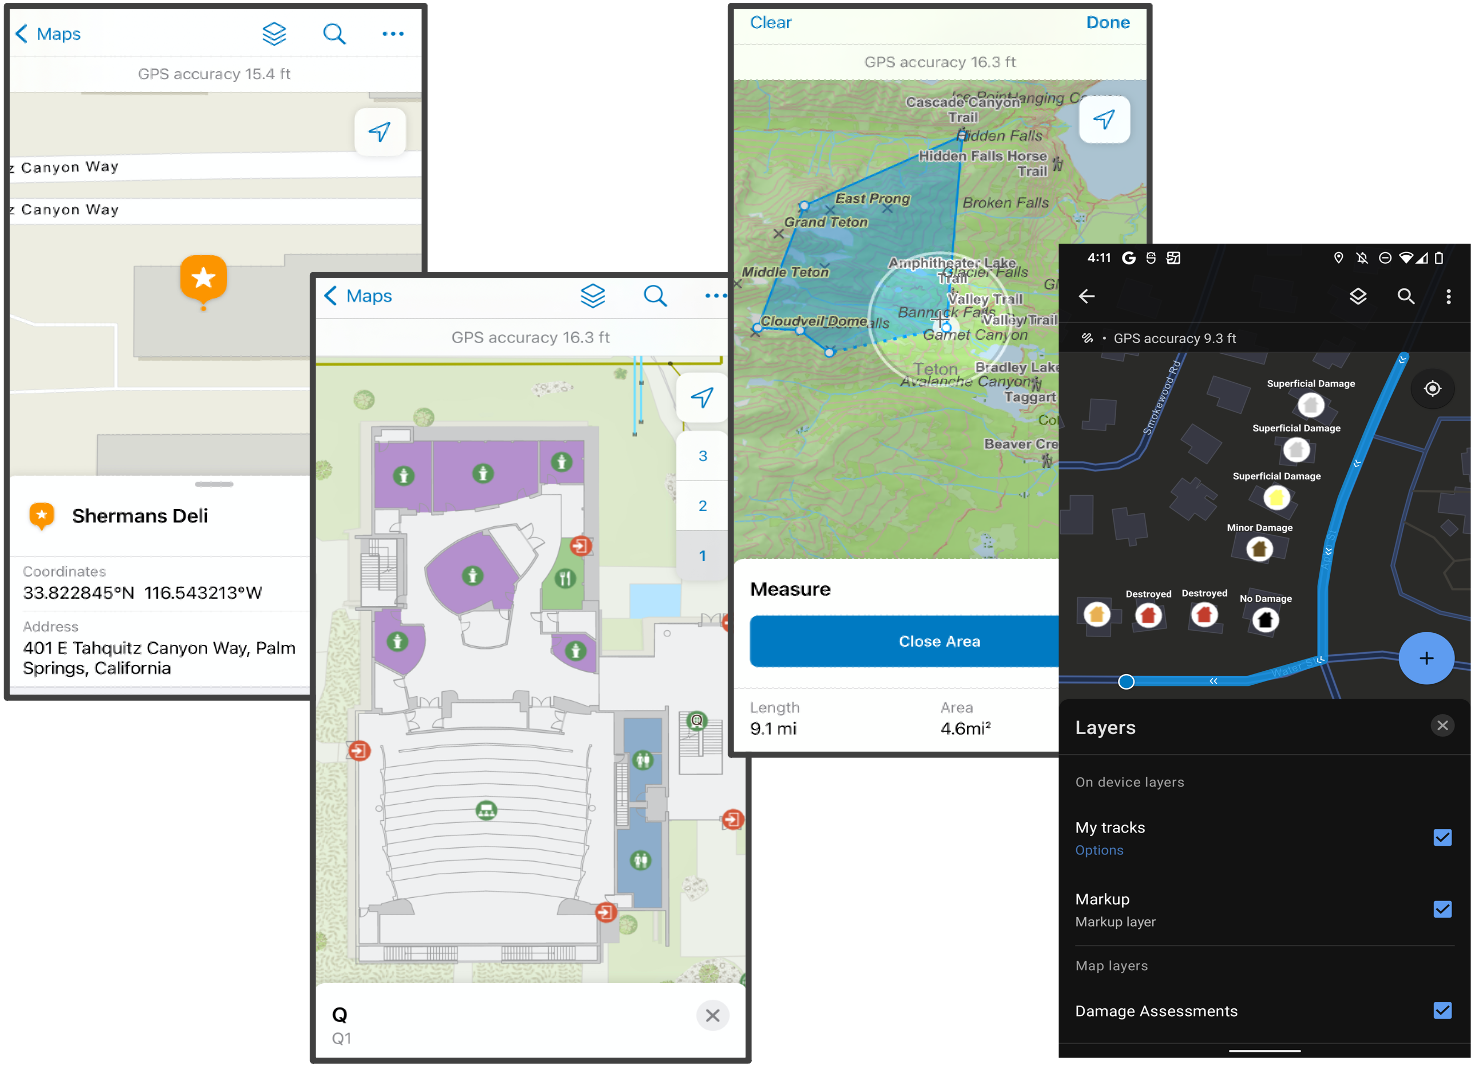 The Q4 update includes new mapping capabilities